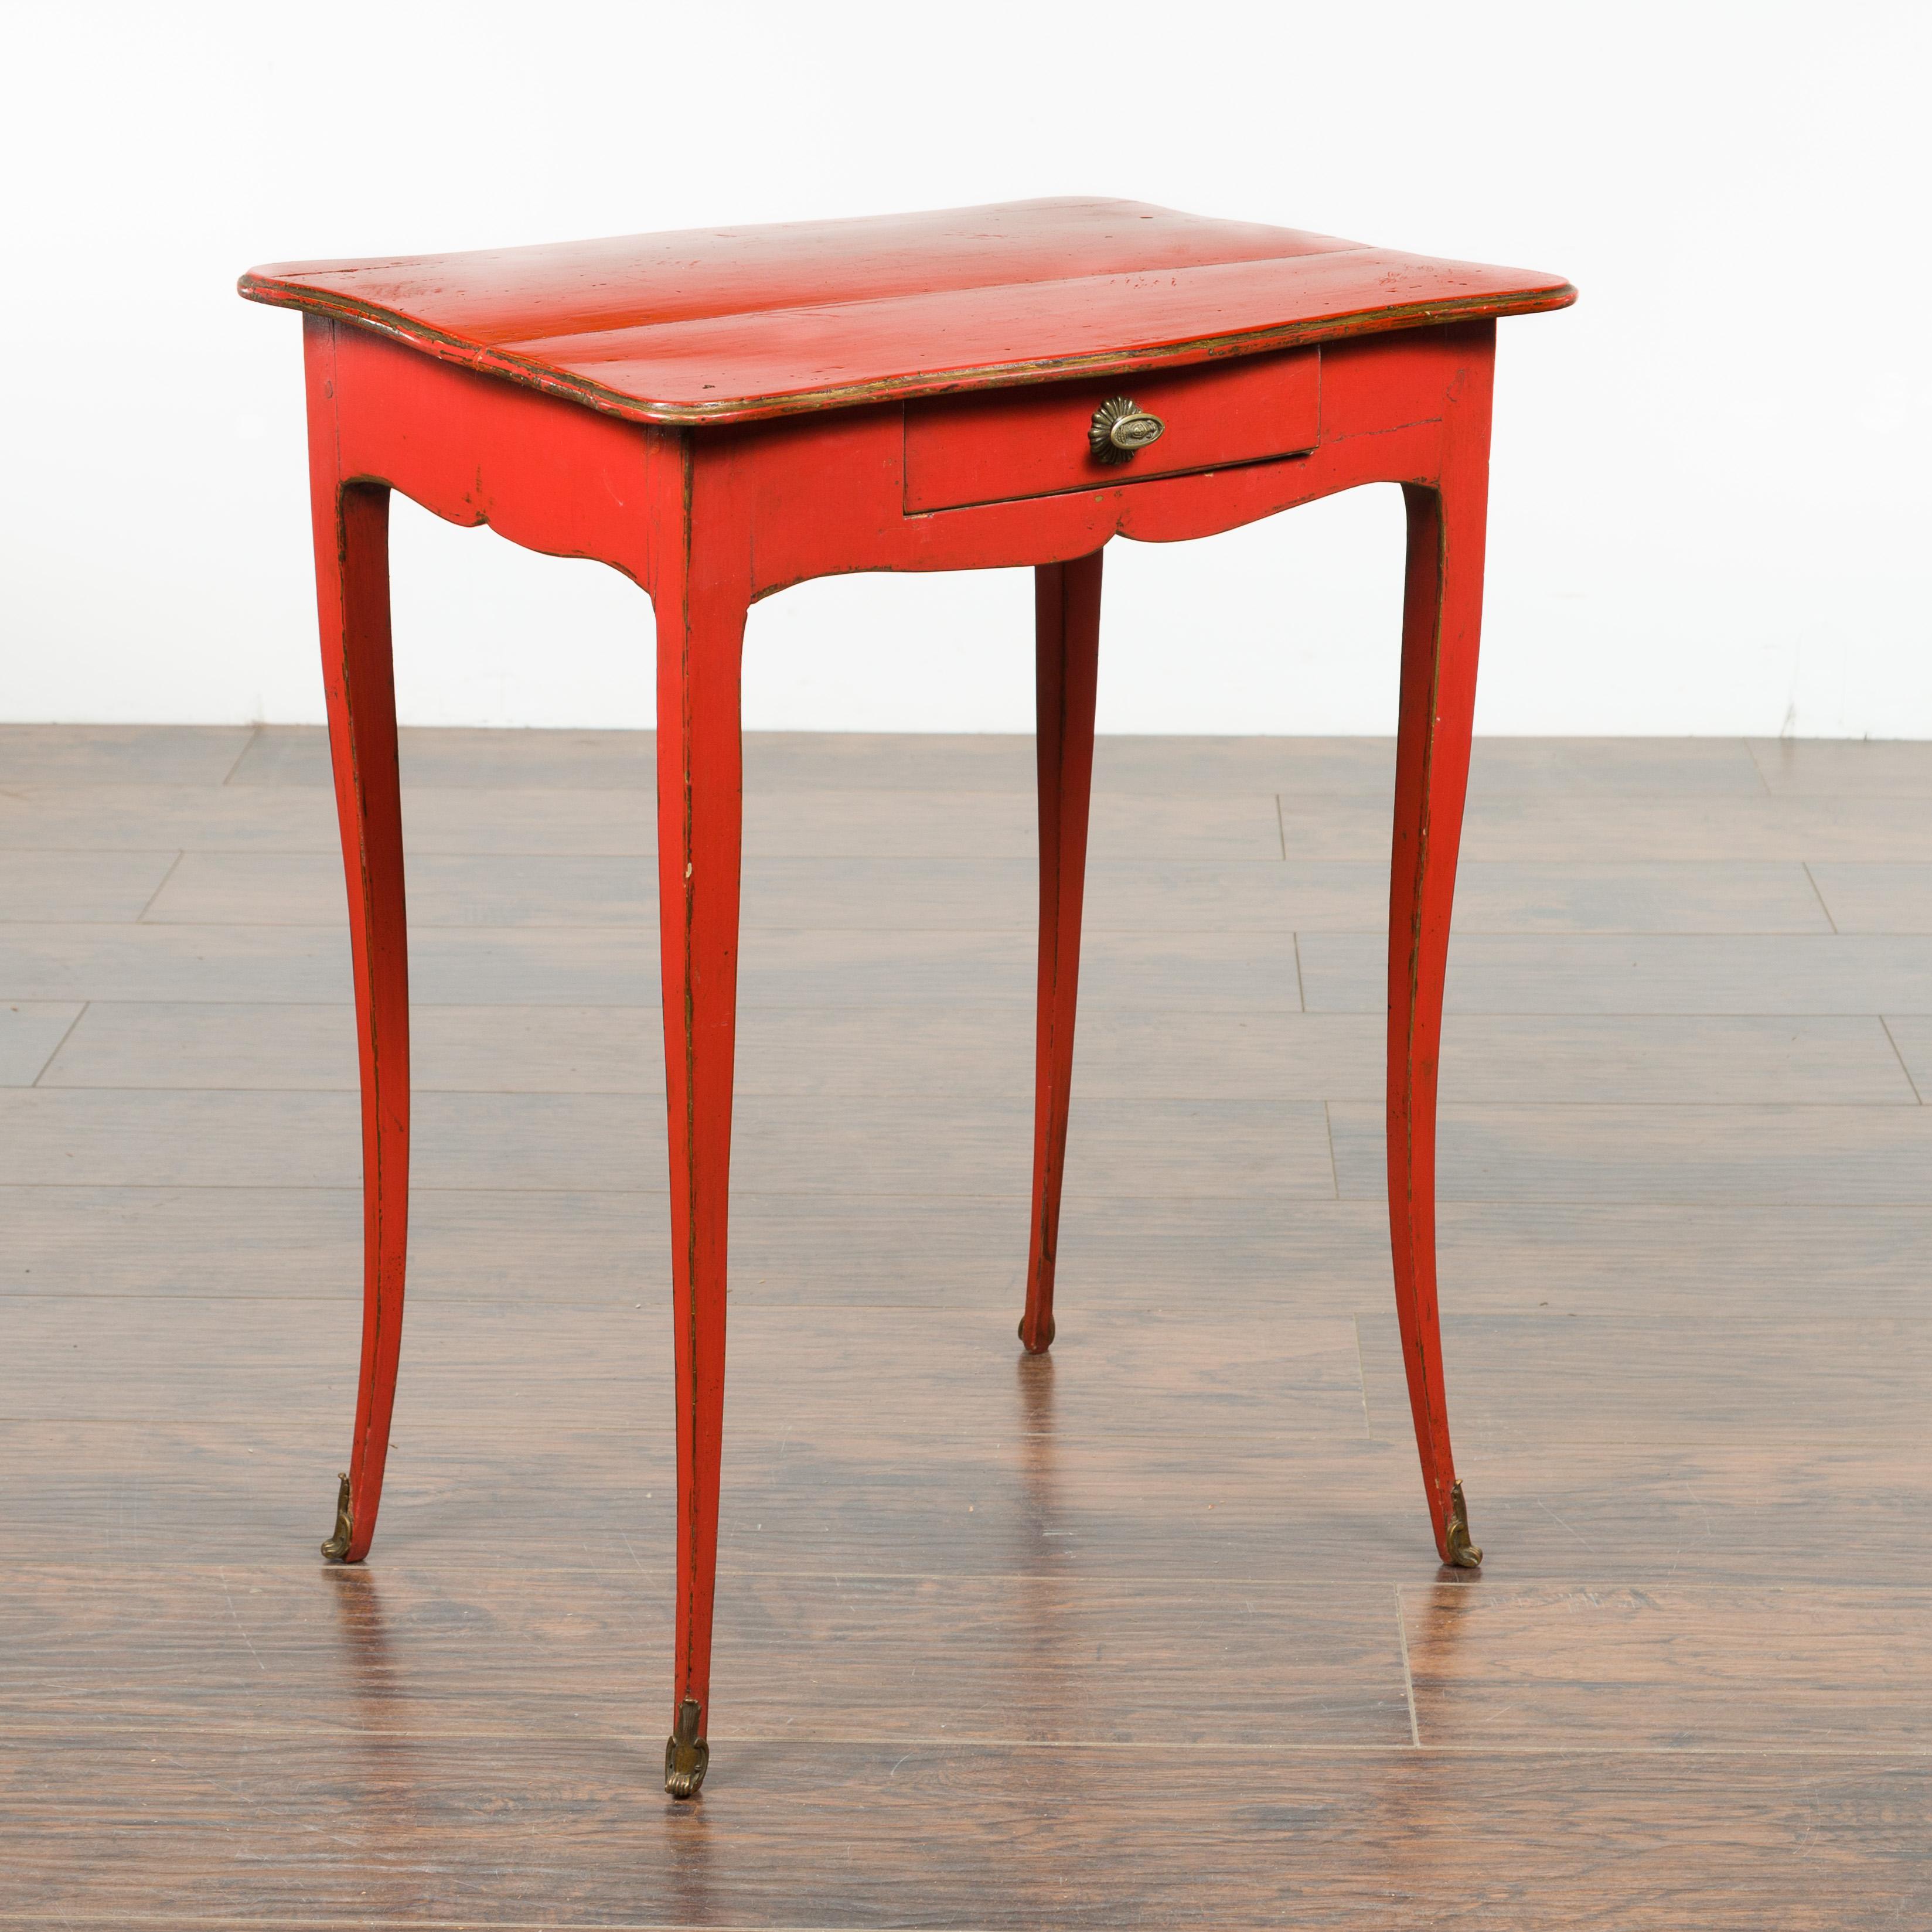 French 1820s Restauration Period Red Side Table with Serpentine Top and Drawer For Sale 5